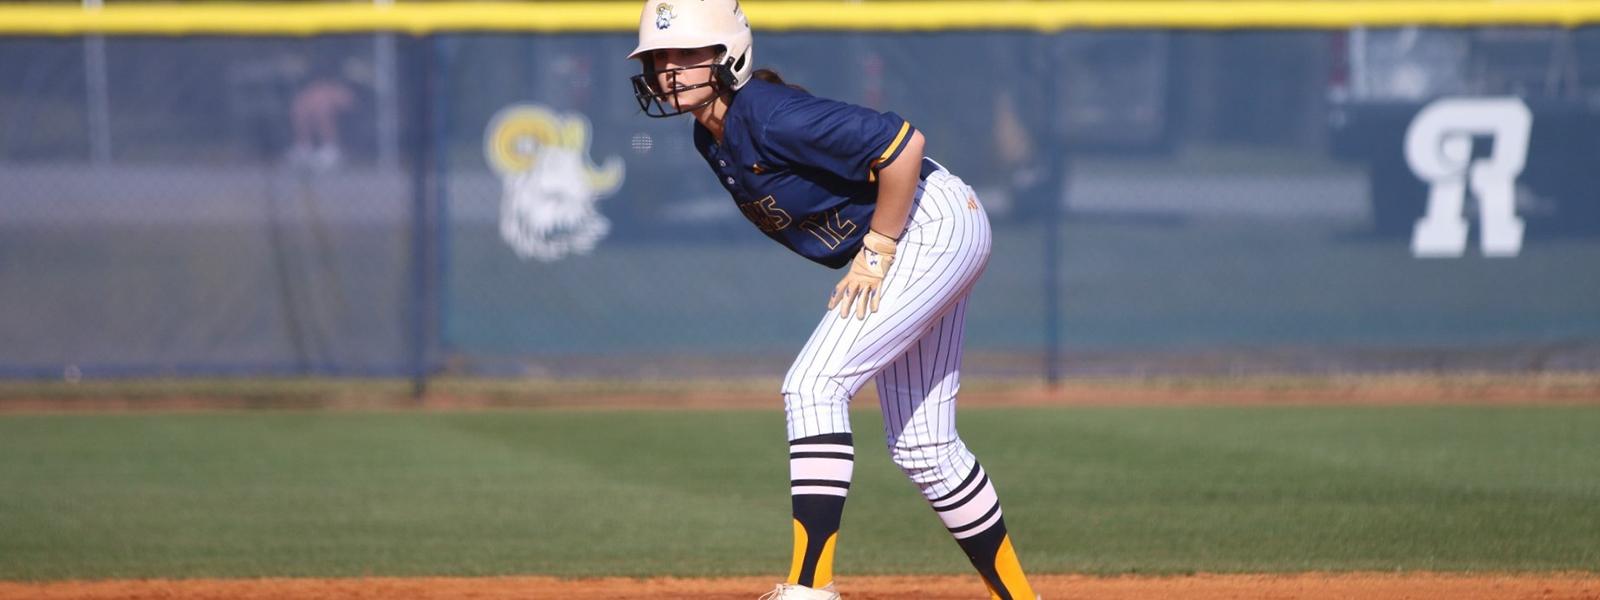 Macey Drye: “I have spent more time with the people on my team than anyone else at CIU, and the relationships that I have formed with my teammates I will never forget."